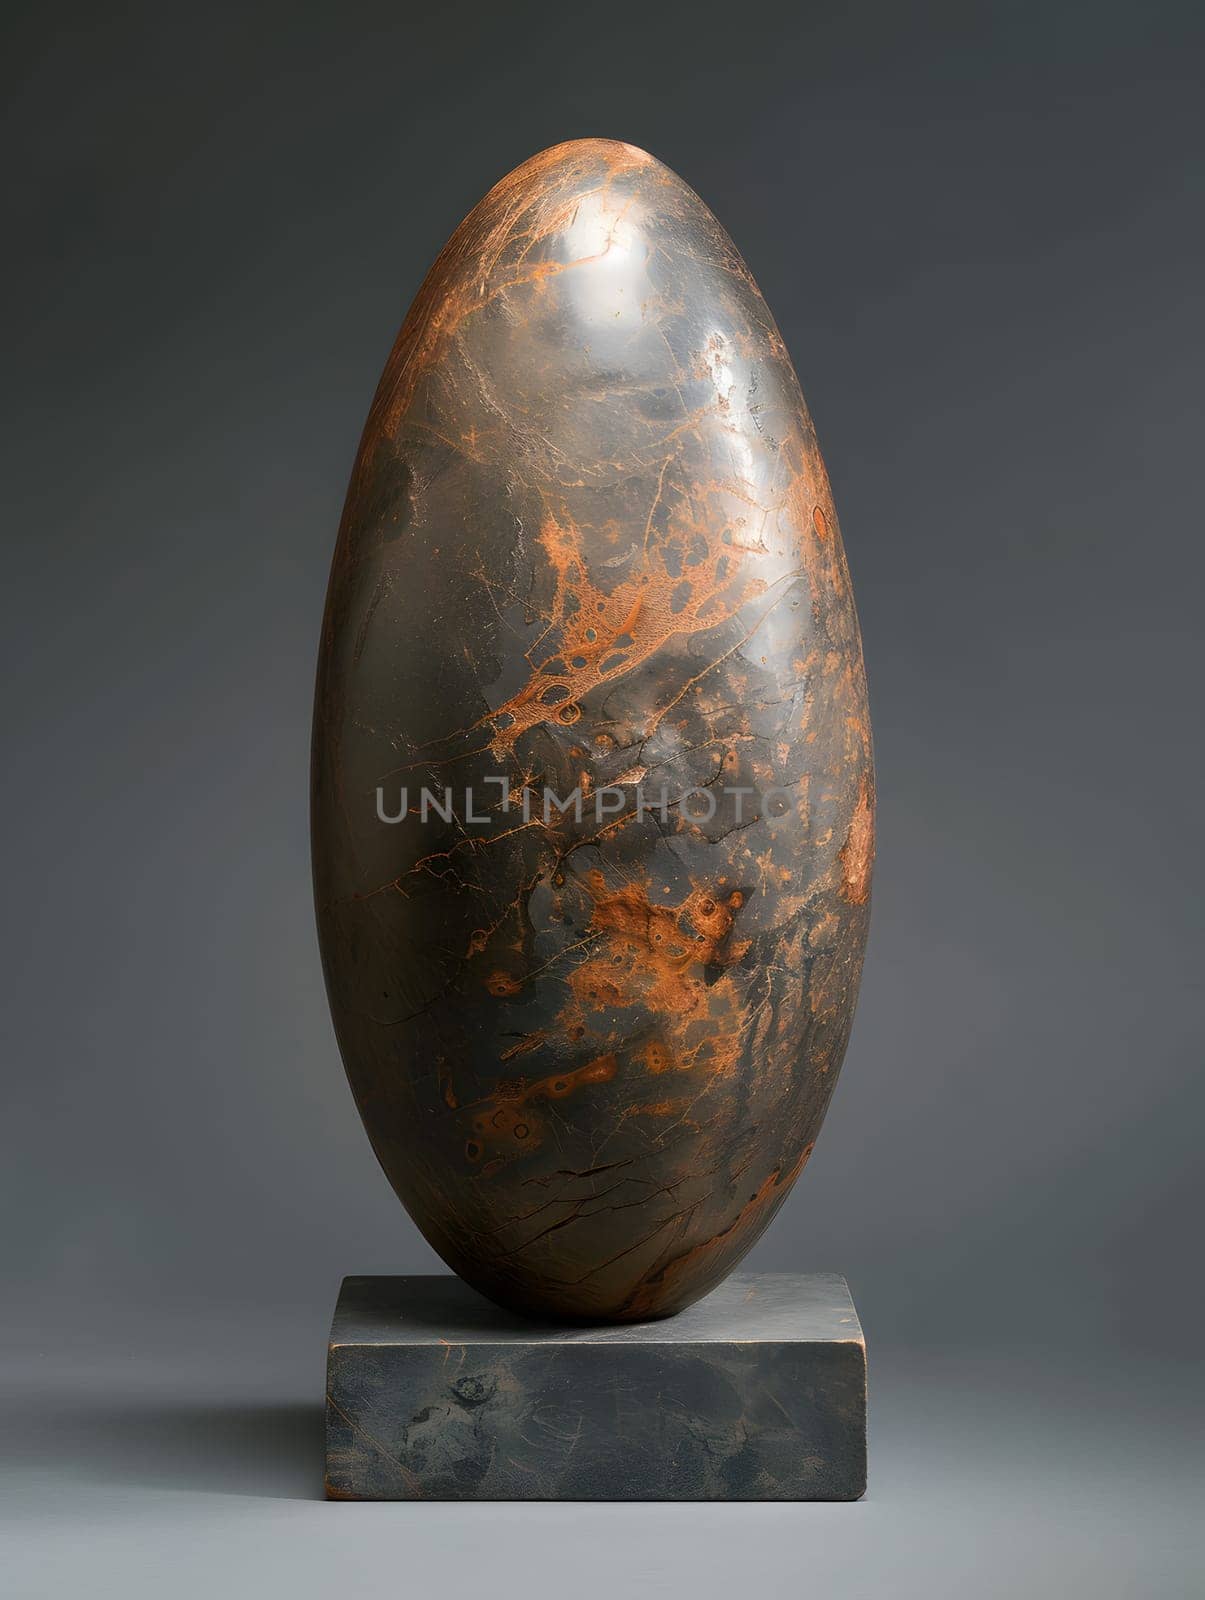 A stone egg rests on a gray surface in a still life photography composition by Nadtochiy